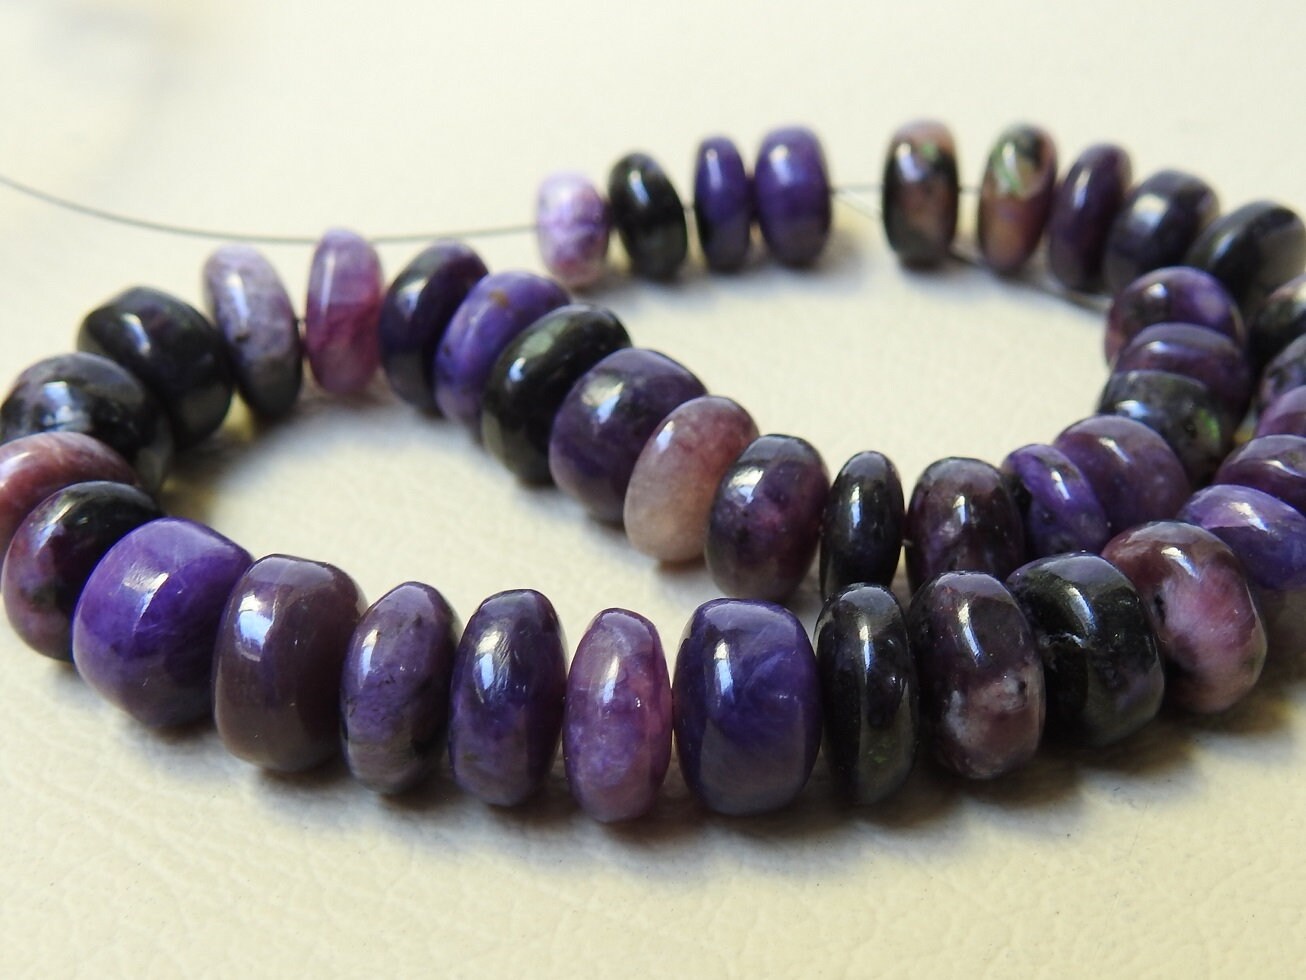 Charoite Smooth Roundel Bead,Shaded,Handmade,Loose Stone,Wholesaler,Supplies,Necklace,For Making Jewelry 8Inch Strand 100%Natural PME-B14 | Save 33% - Rajasthan Living 12